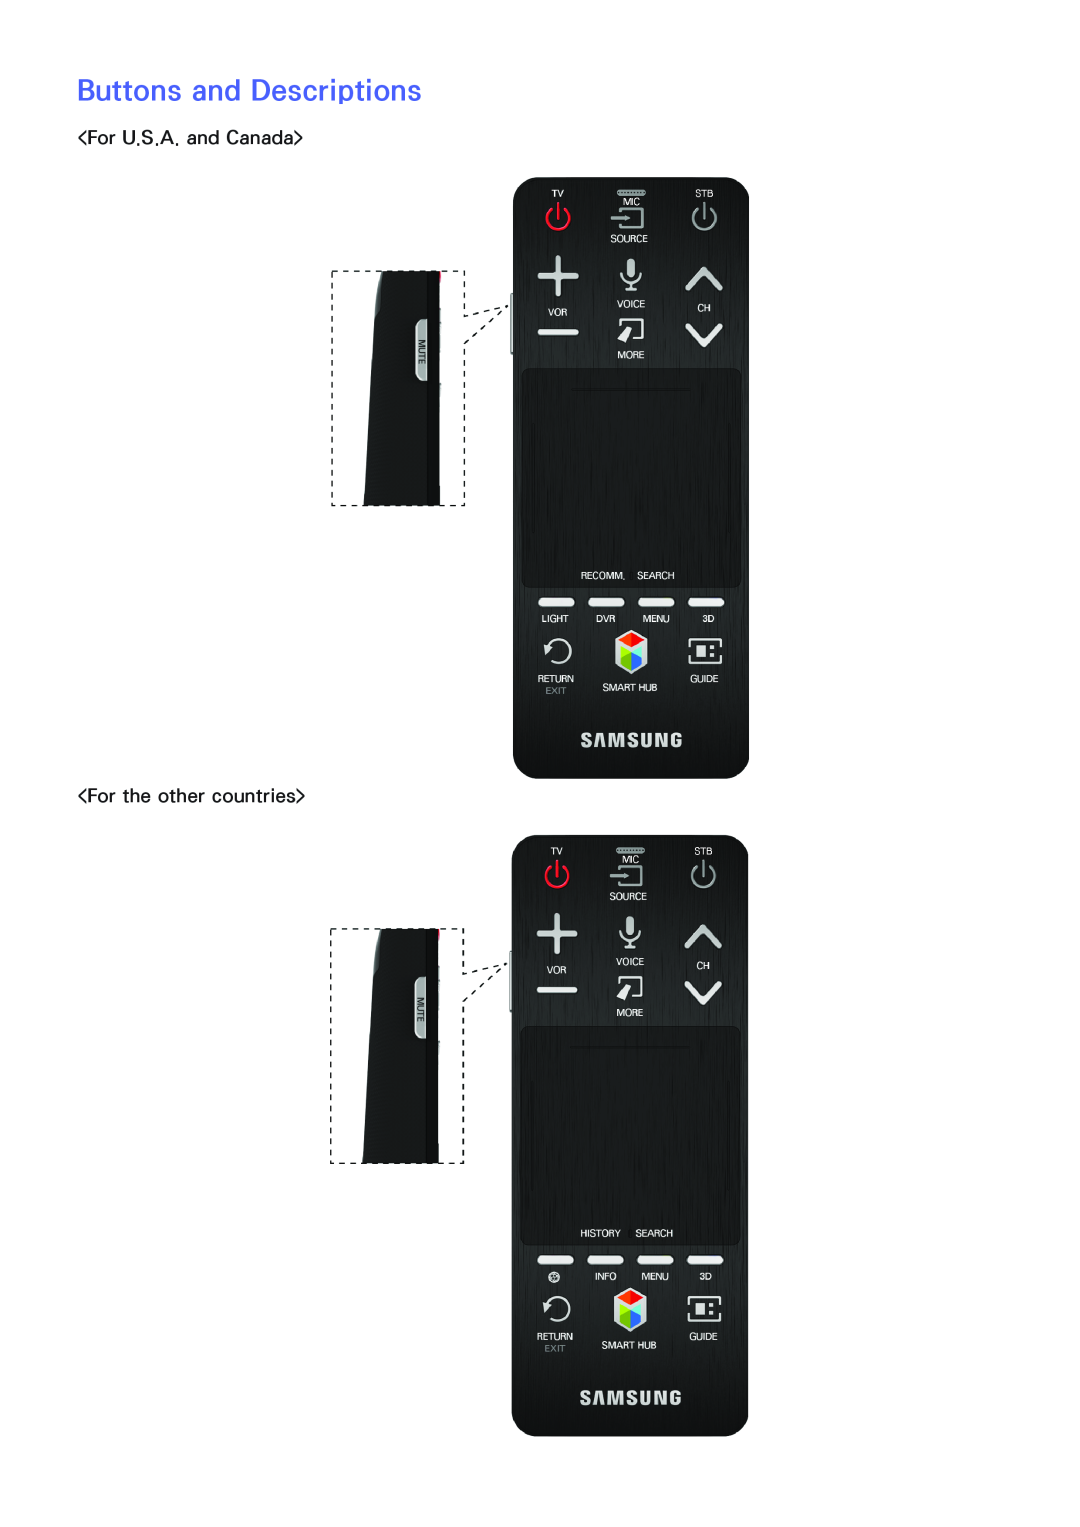 Samsung SEK-1000 manual Buttons and Descriptions, <For U.S.A. and Canada> <For the other countries> 